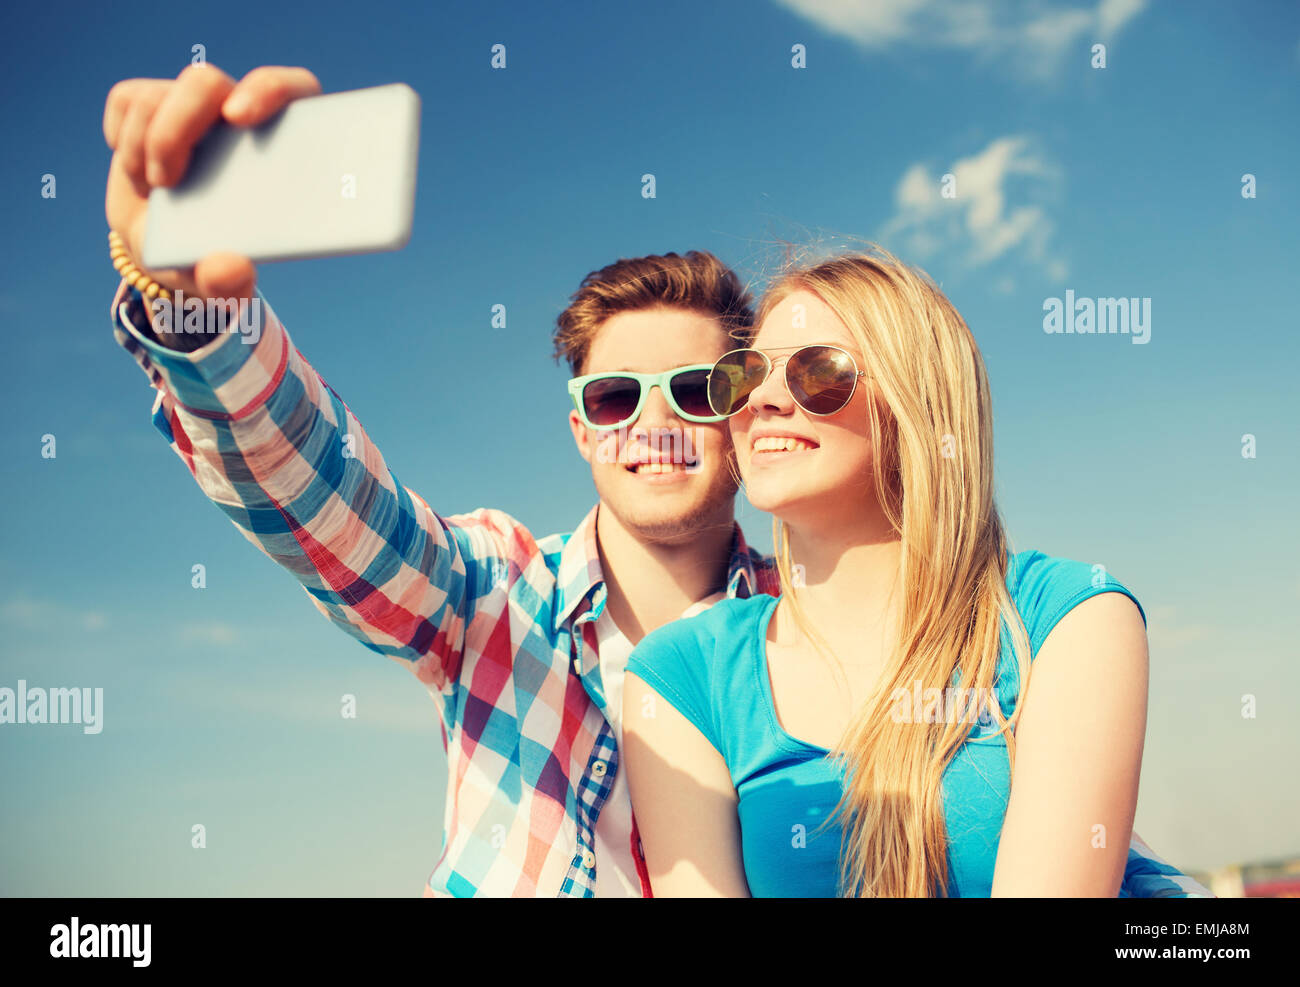 Smiling young couple outdoors Banque D'Images